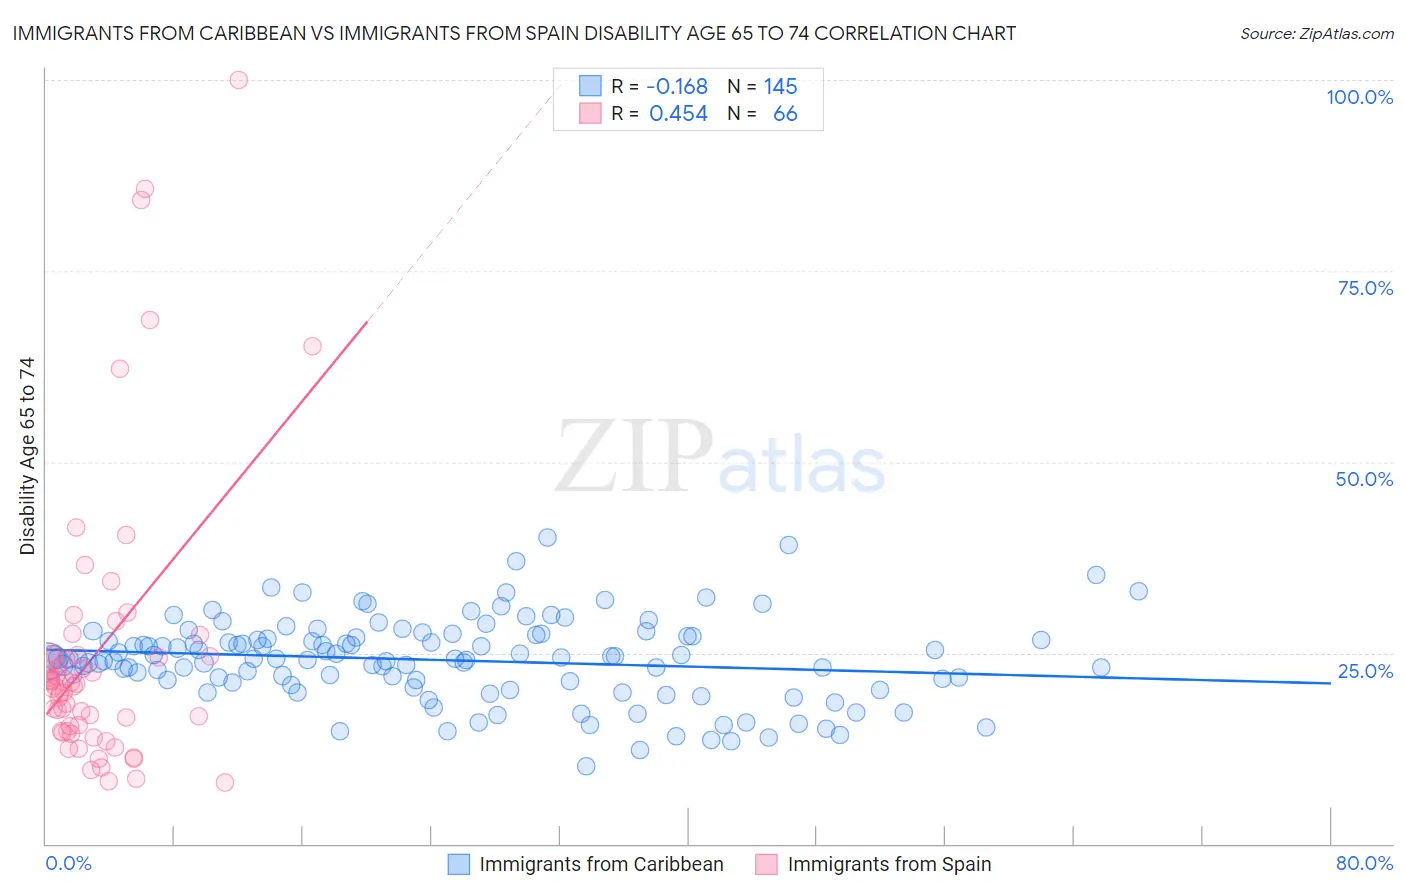 Immigrants from Caribbean vs Immigrants from Spain Disability Age 65 to 74